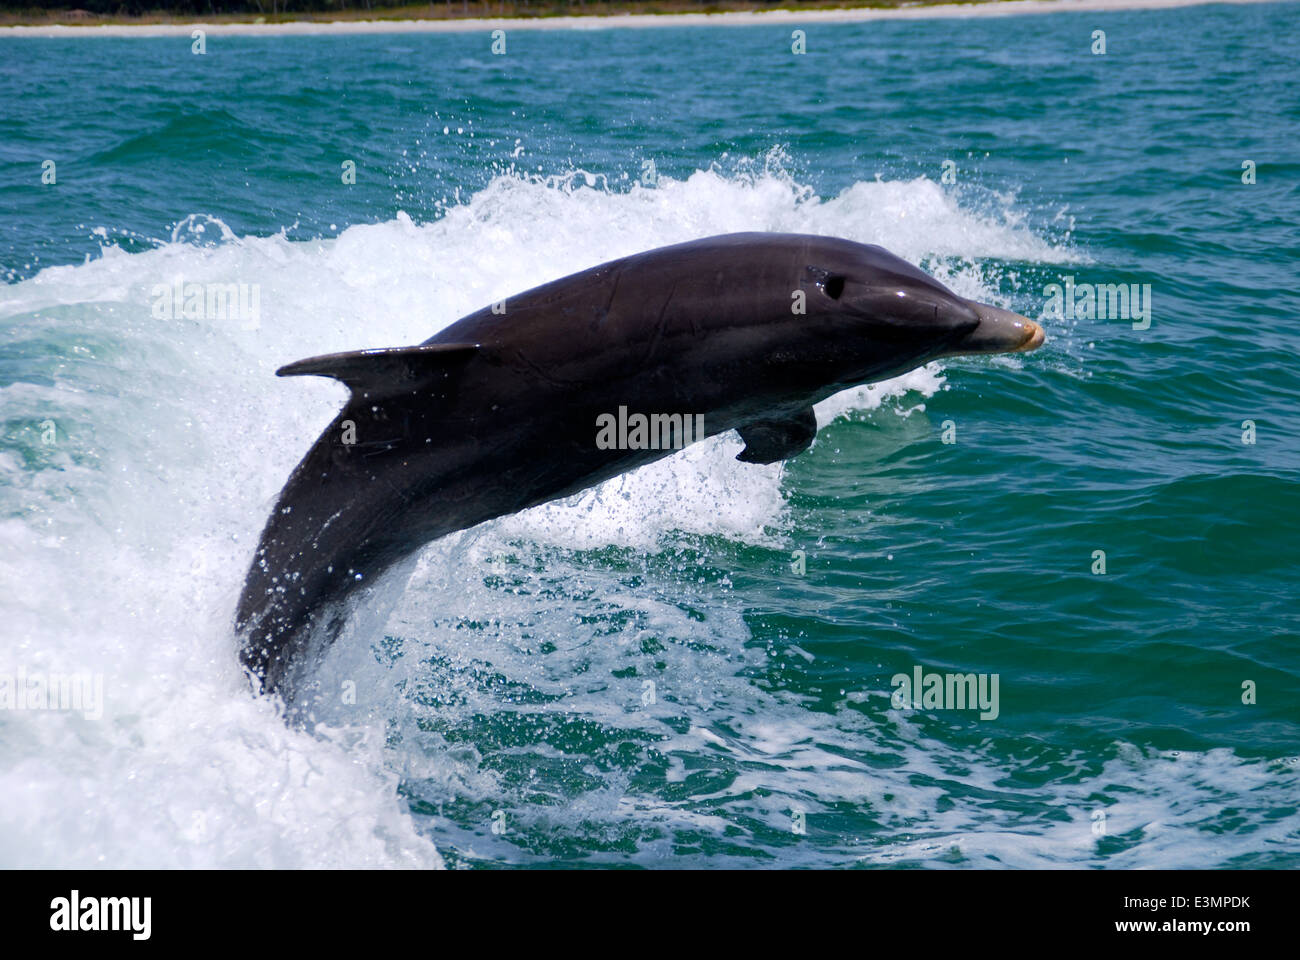 Dolphin jumping in Florida in the Gulf of Mexico. Stock Photo